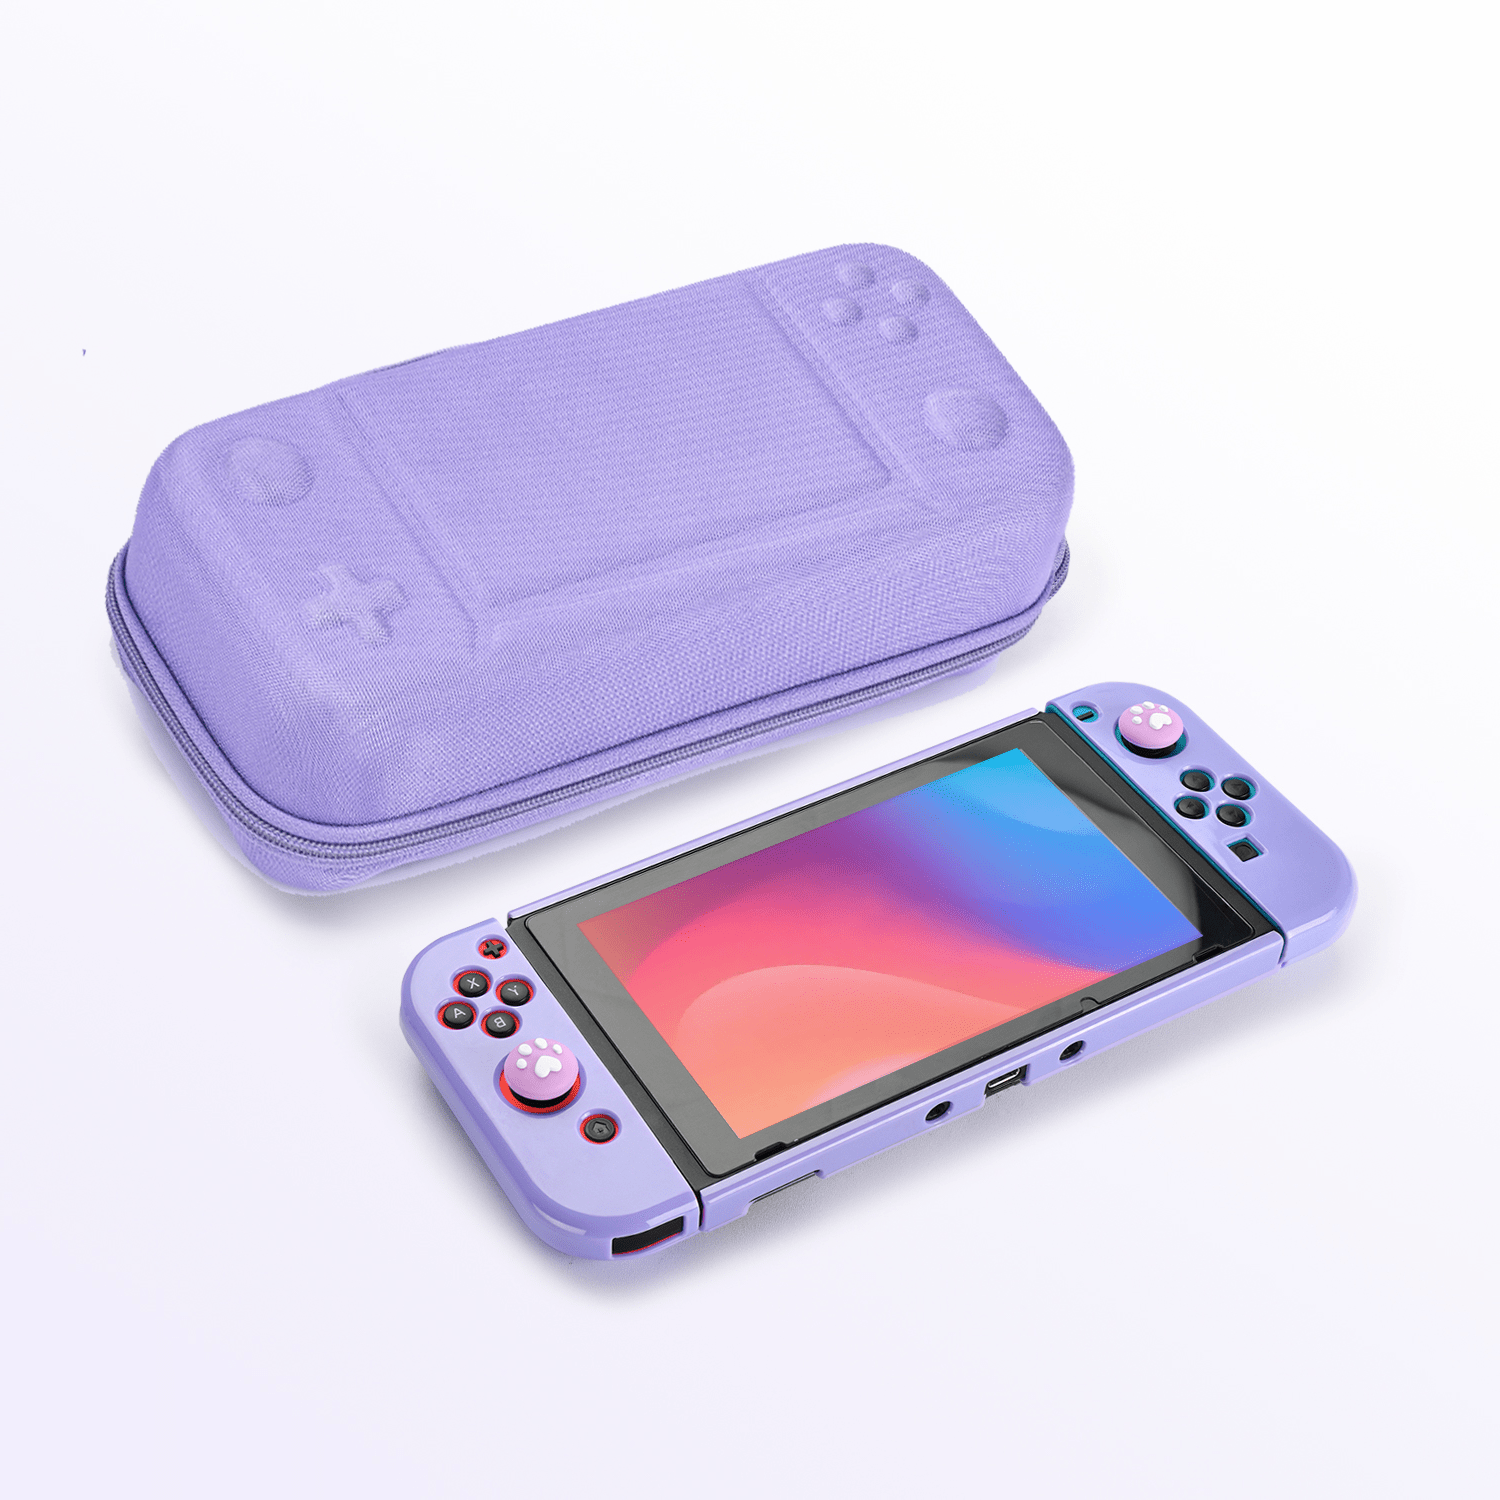 Younik Button Design Nintendo Switch Bag, Carrying Bag for NS Switch